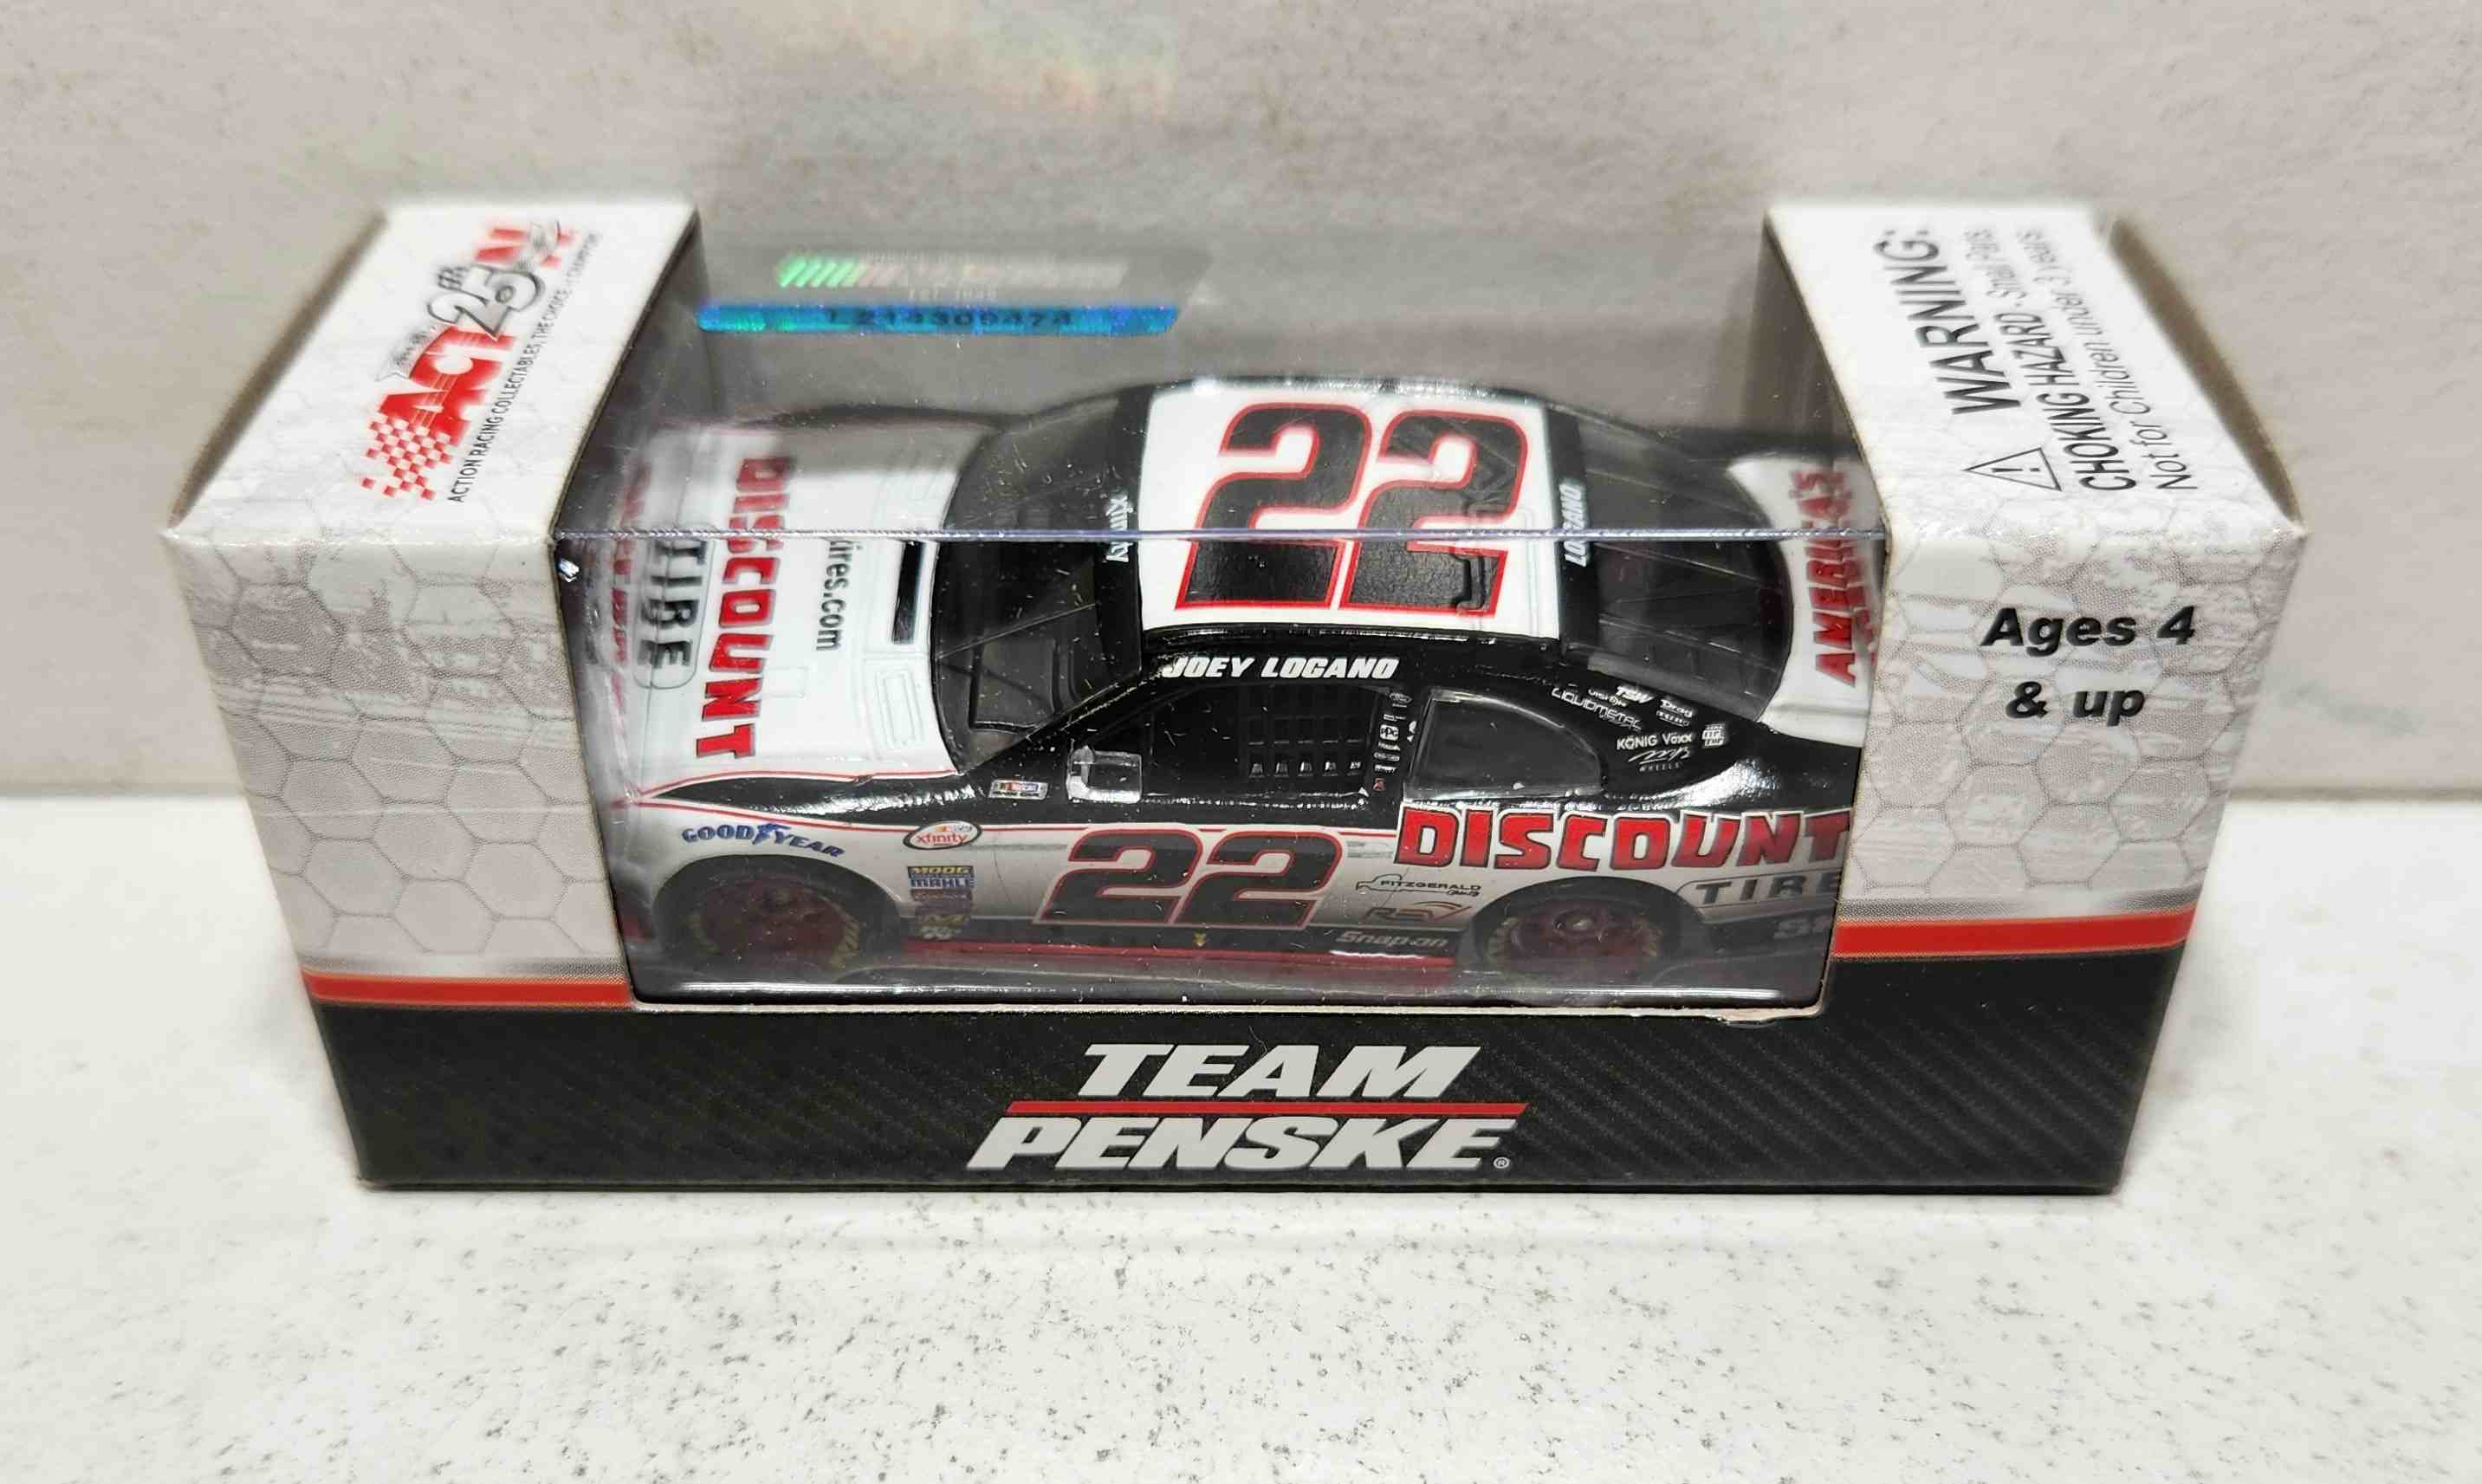 2017 Joey Logano 1/64th Discount Tire "Xfinity Series" Pitstop Series Mustang